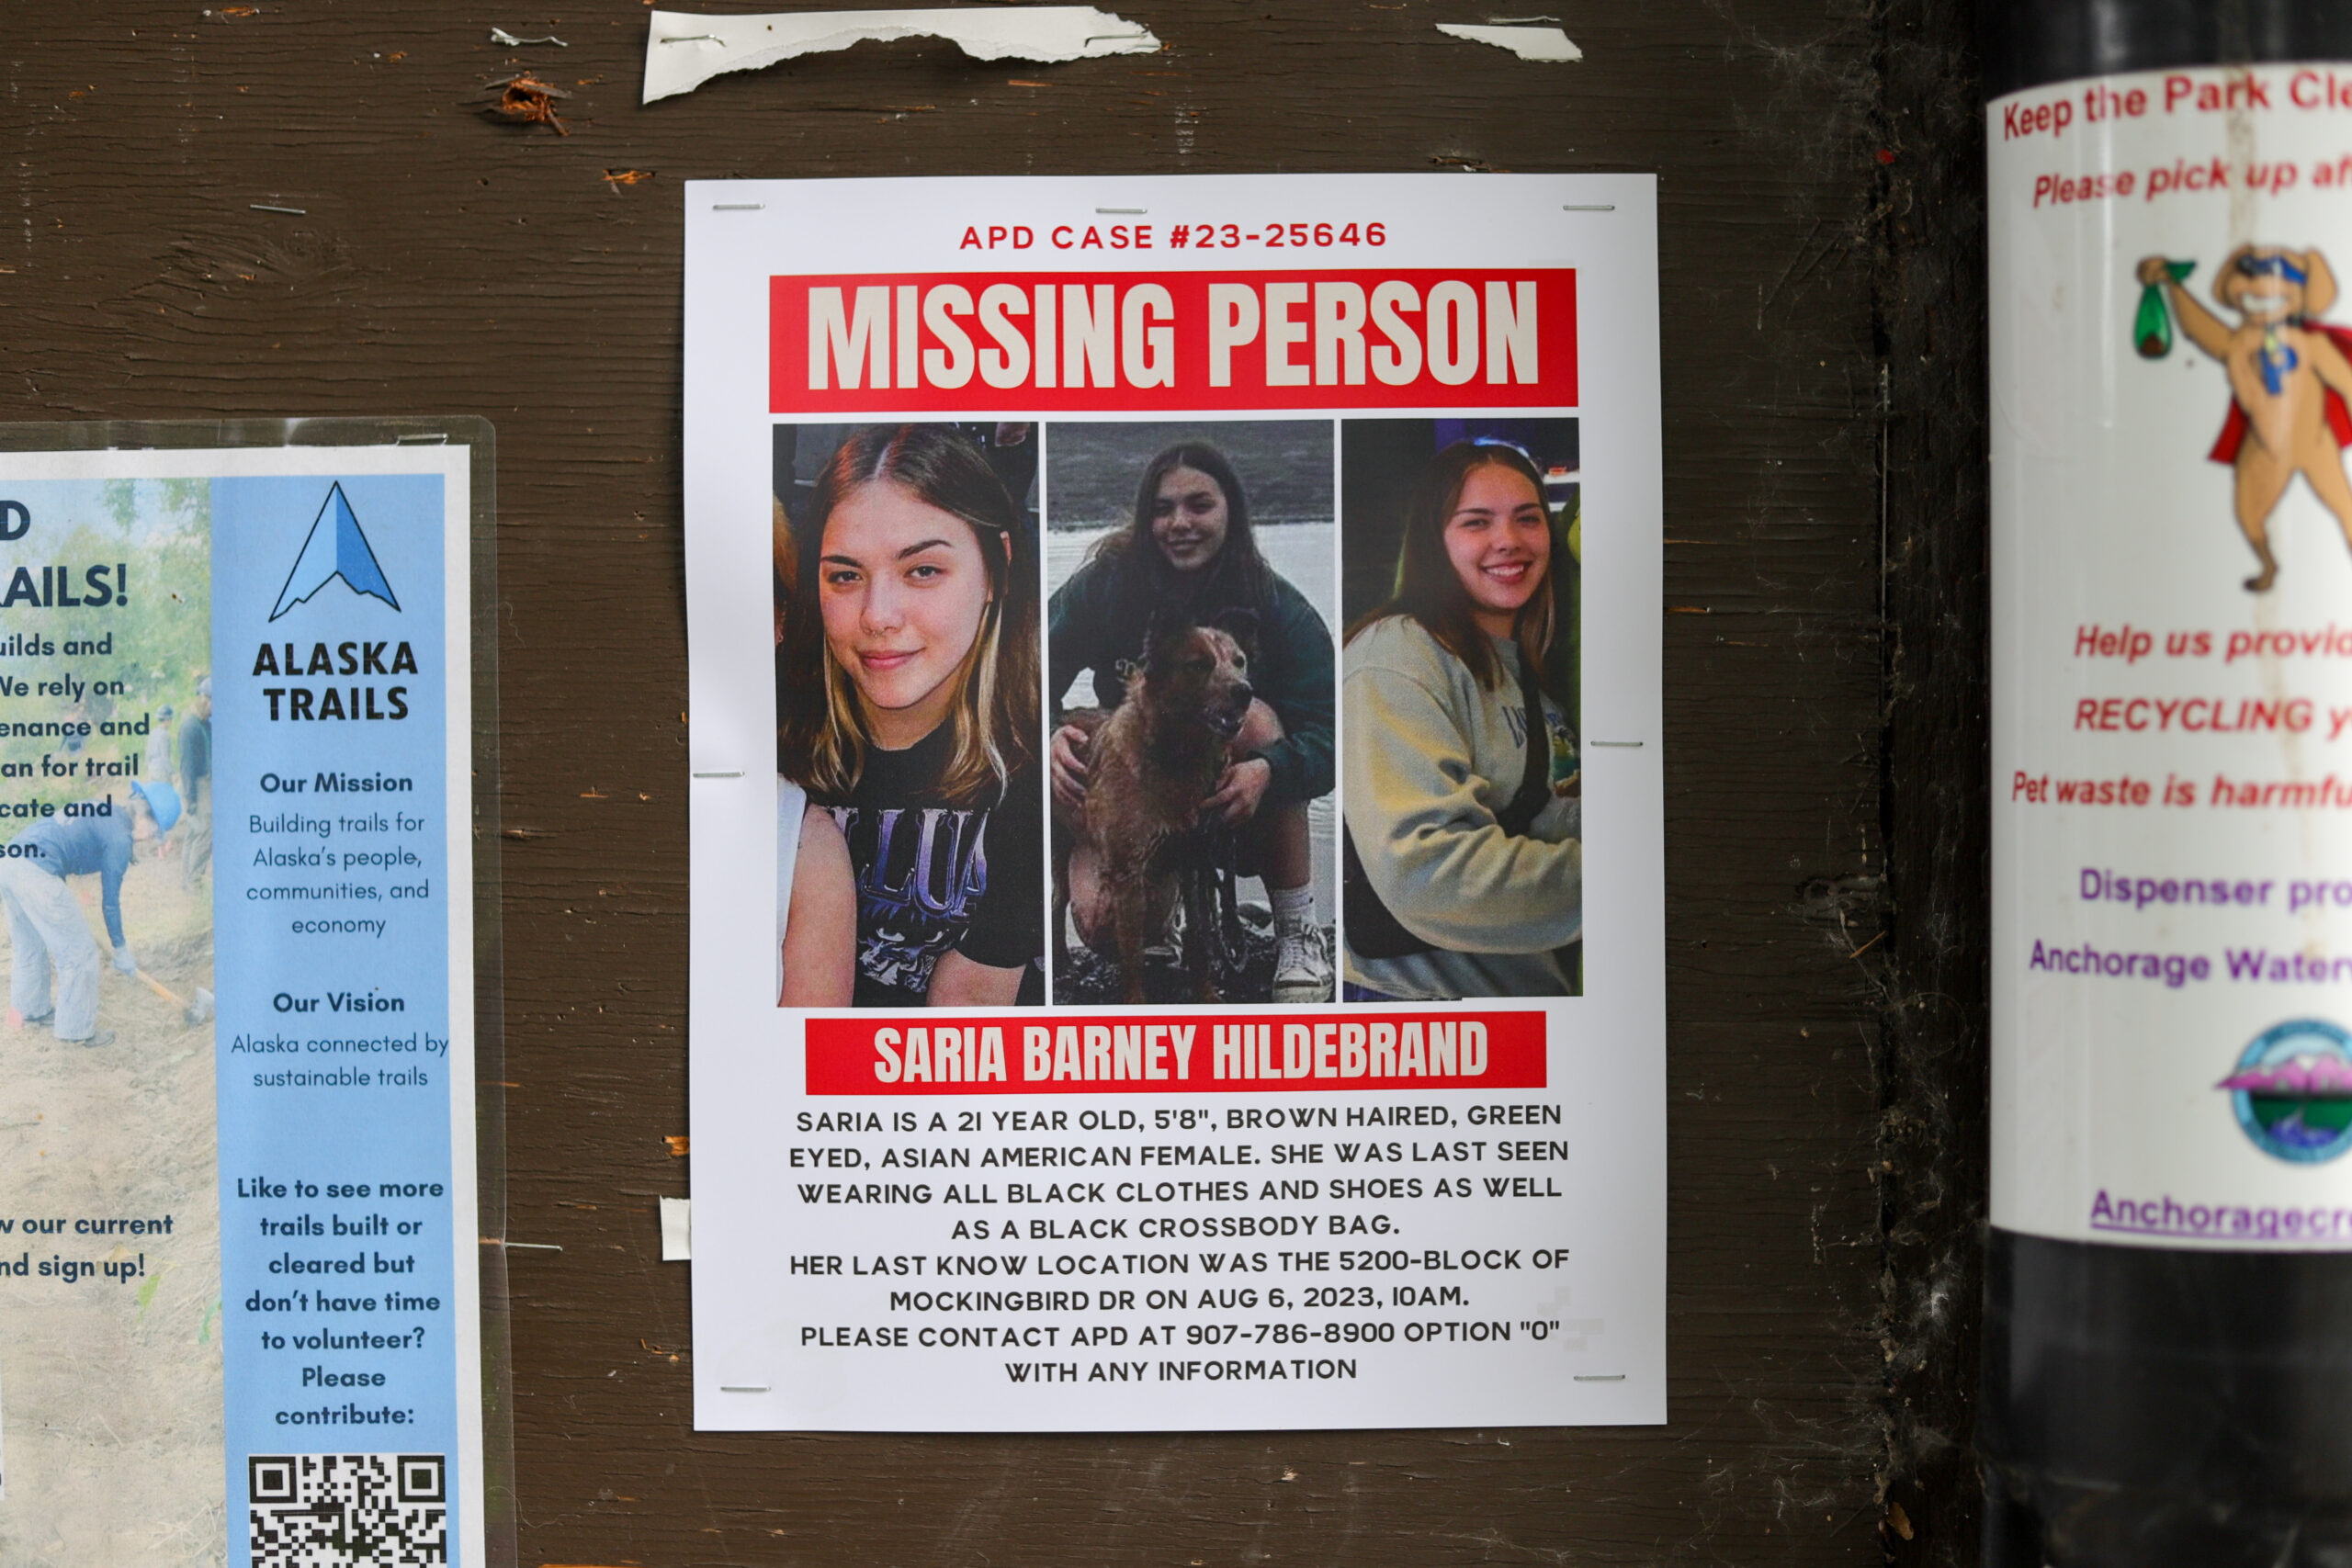 A missing person poster for Saria Barney Hildebrand.